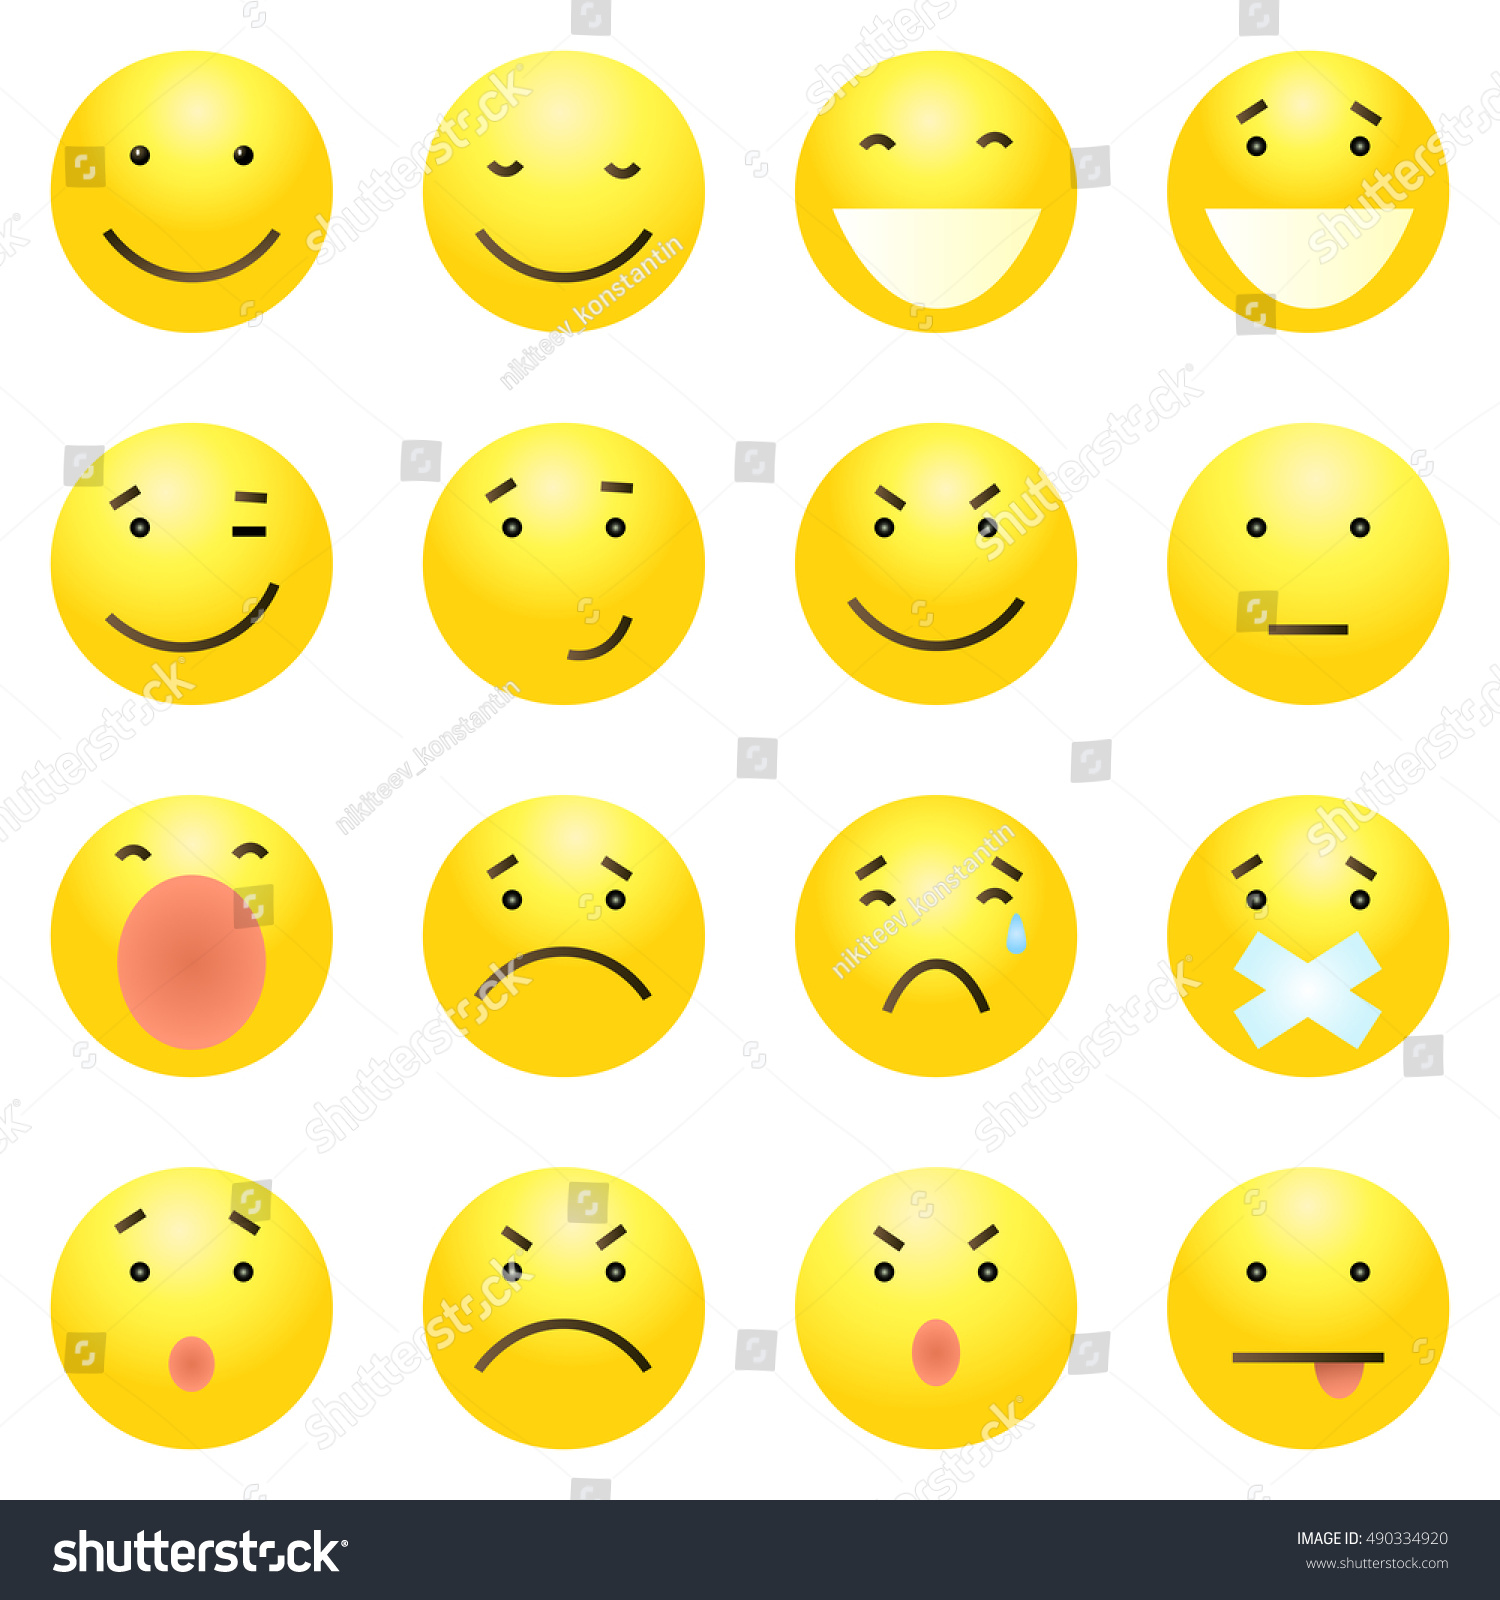 Vector Set Of 16 Yellow Emoticons On White Background - 490334920 ...